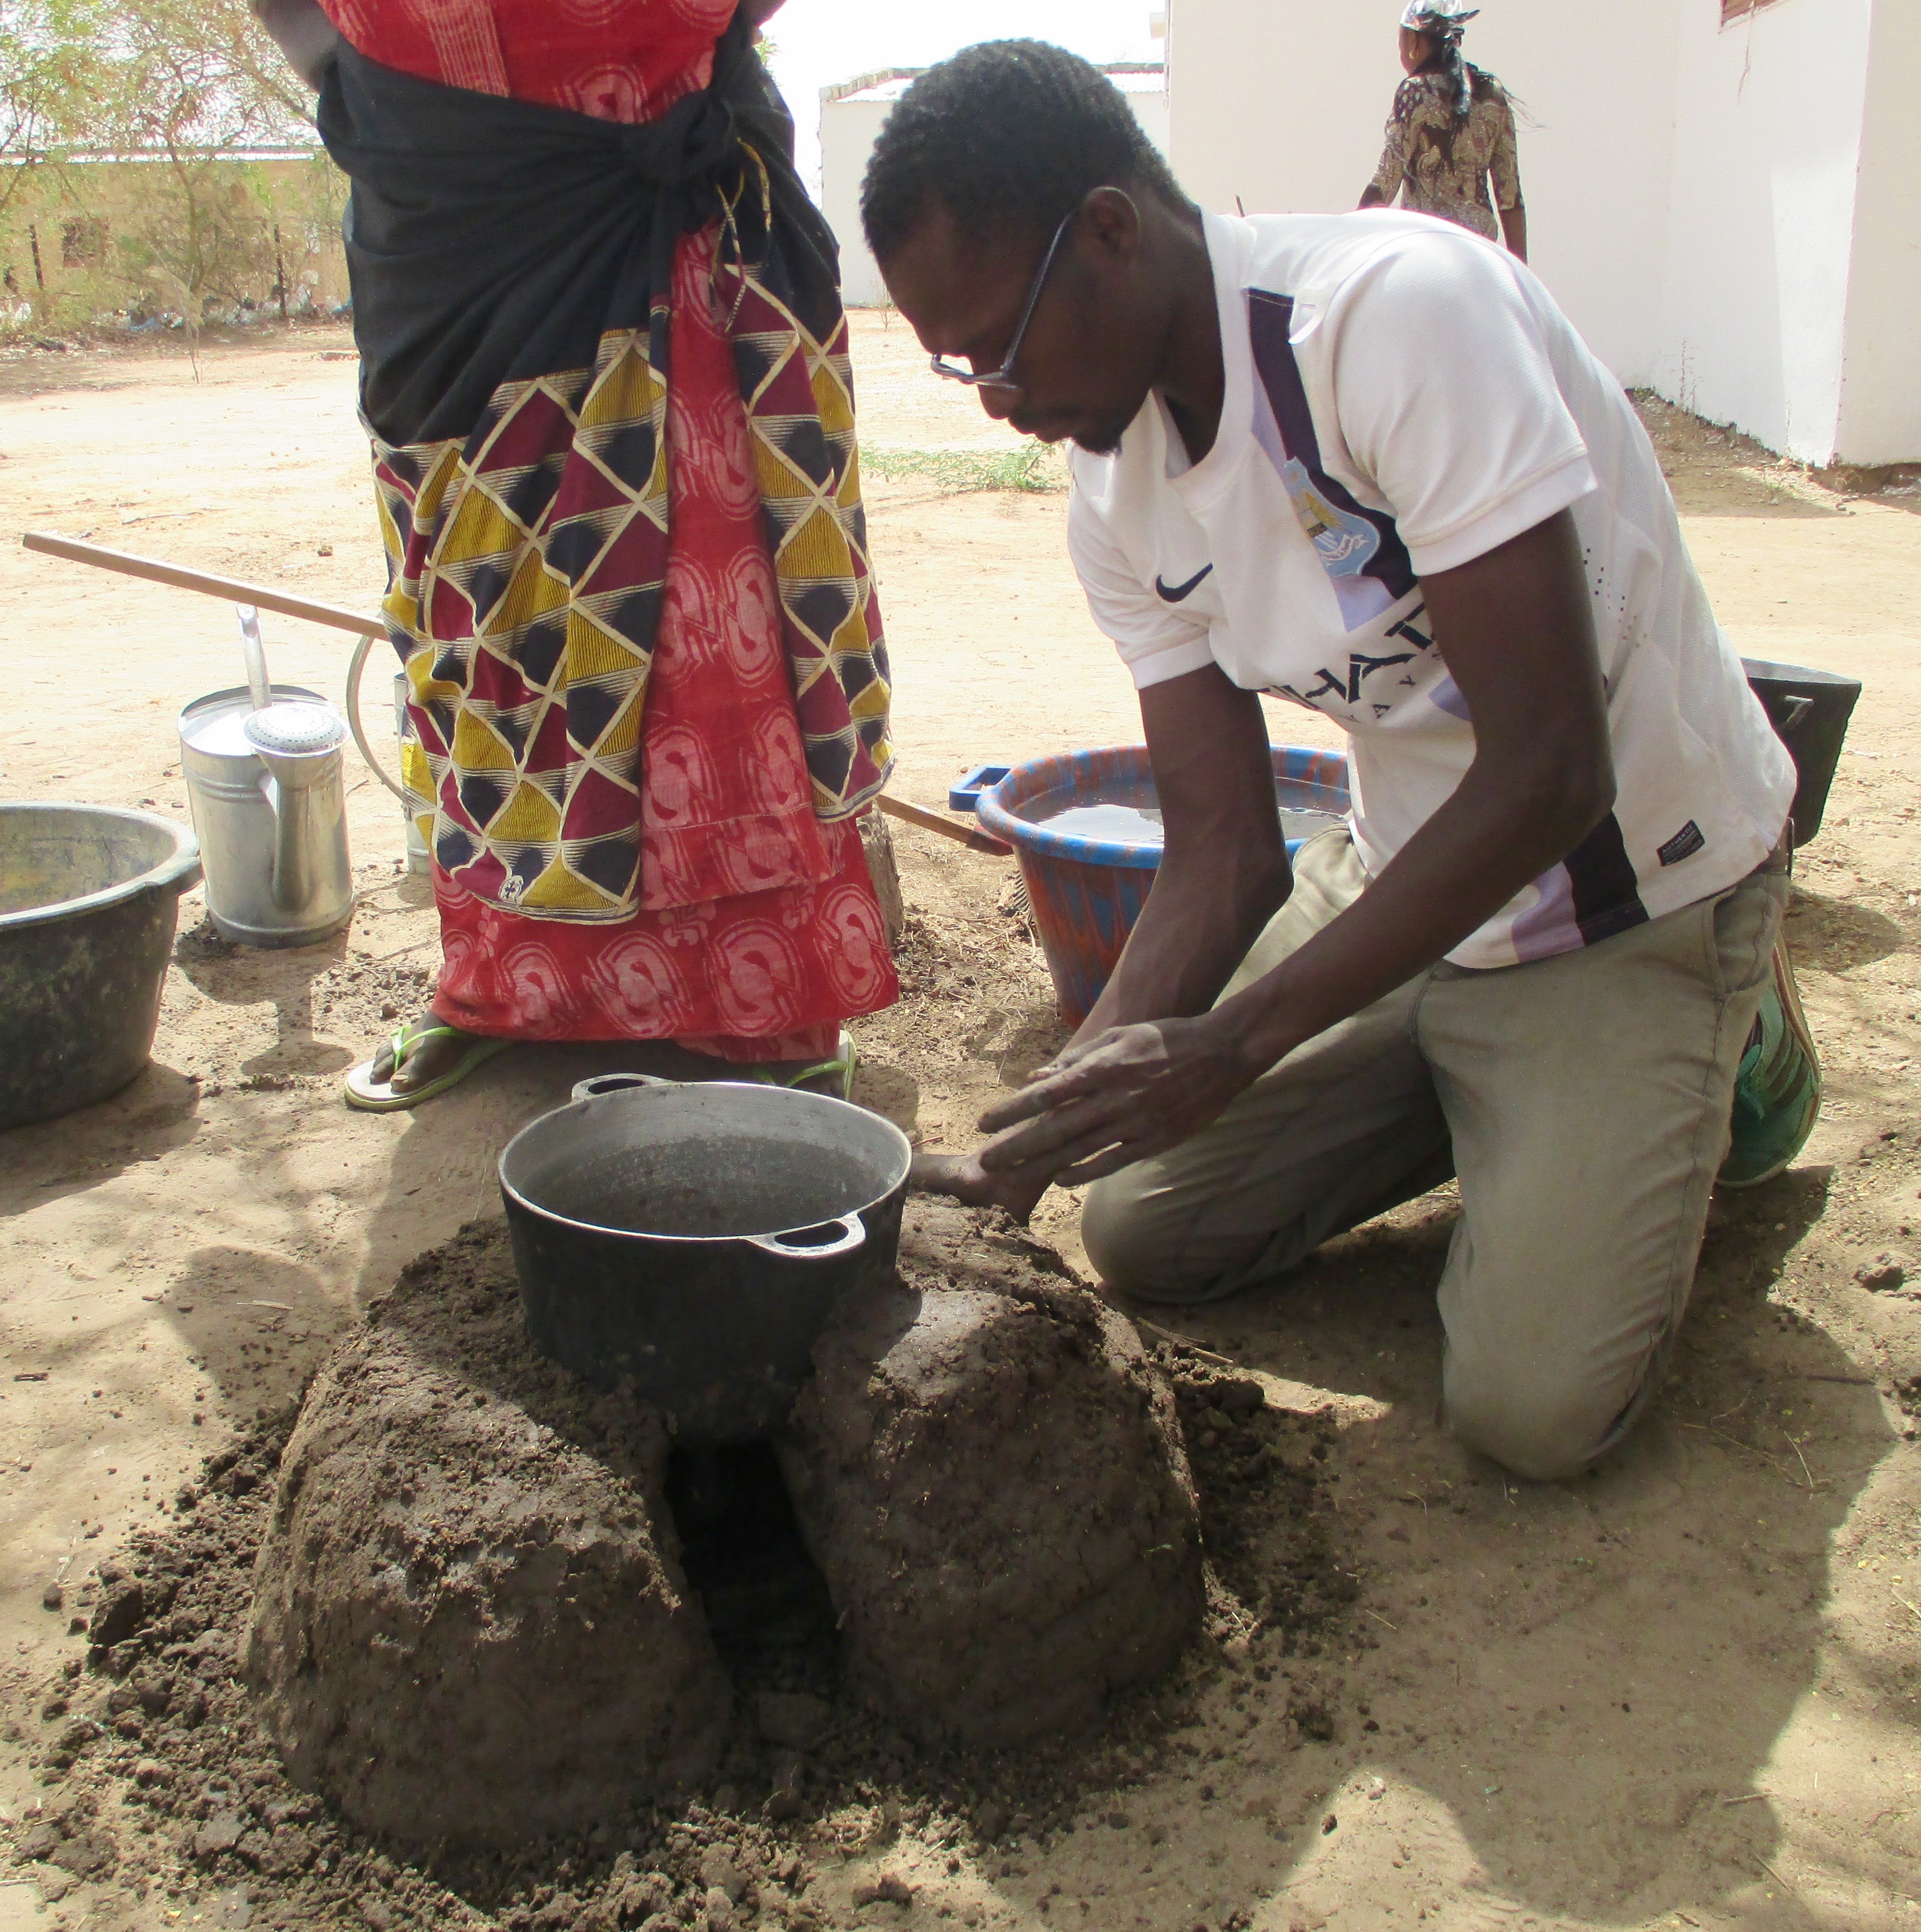 Shaping the cookstove